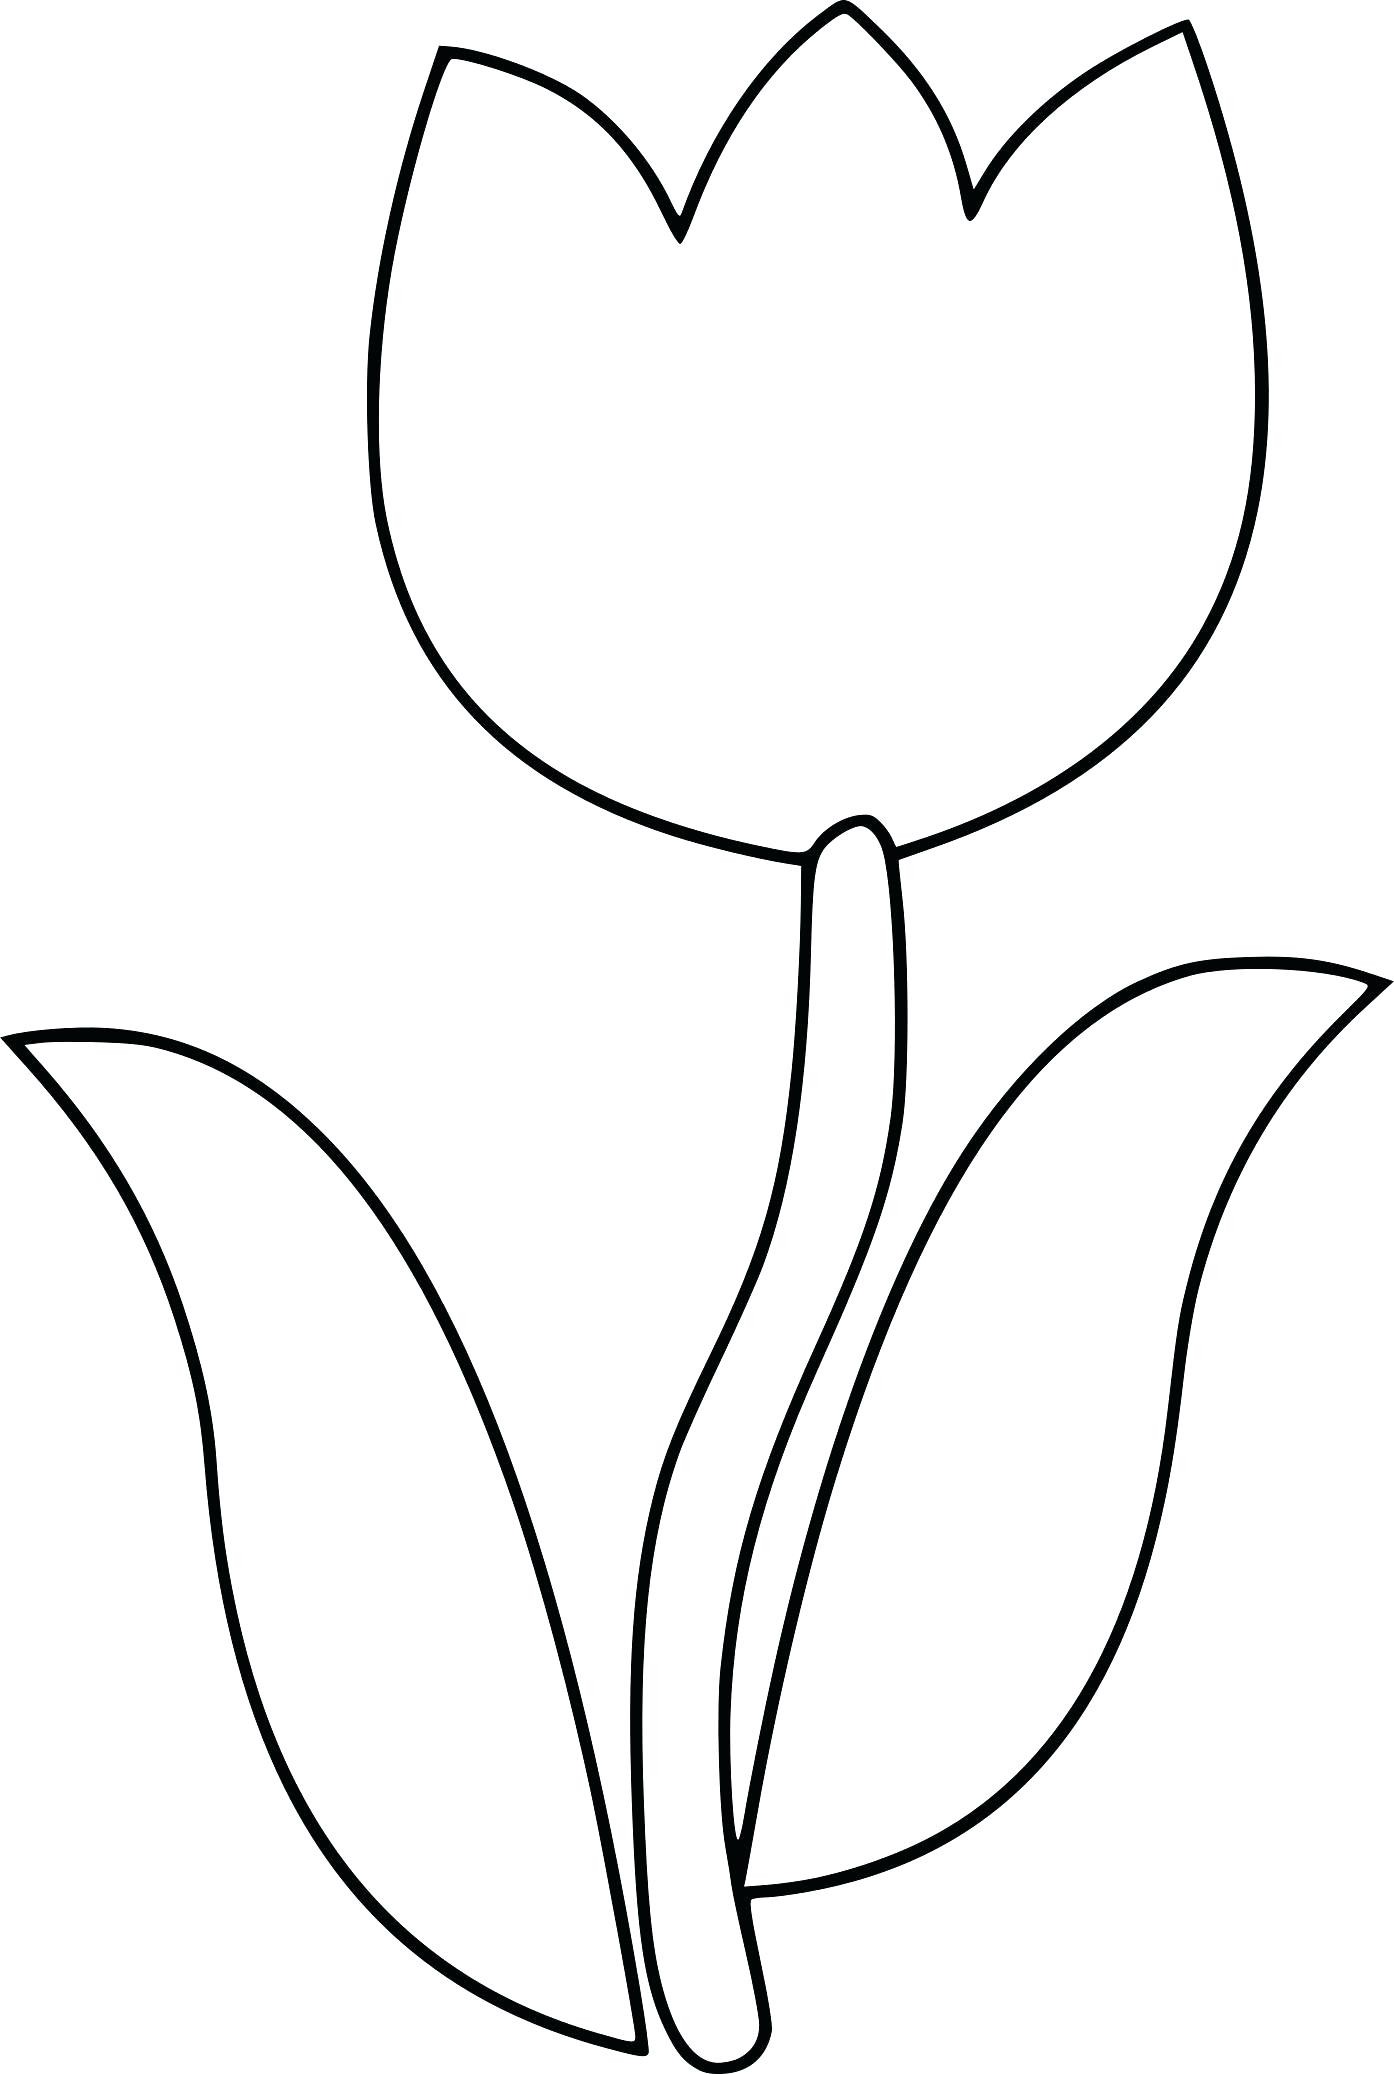 Tulip Coloring Pages at GetColorings.com | Free printable colorings ...